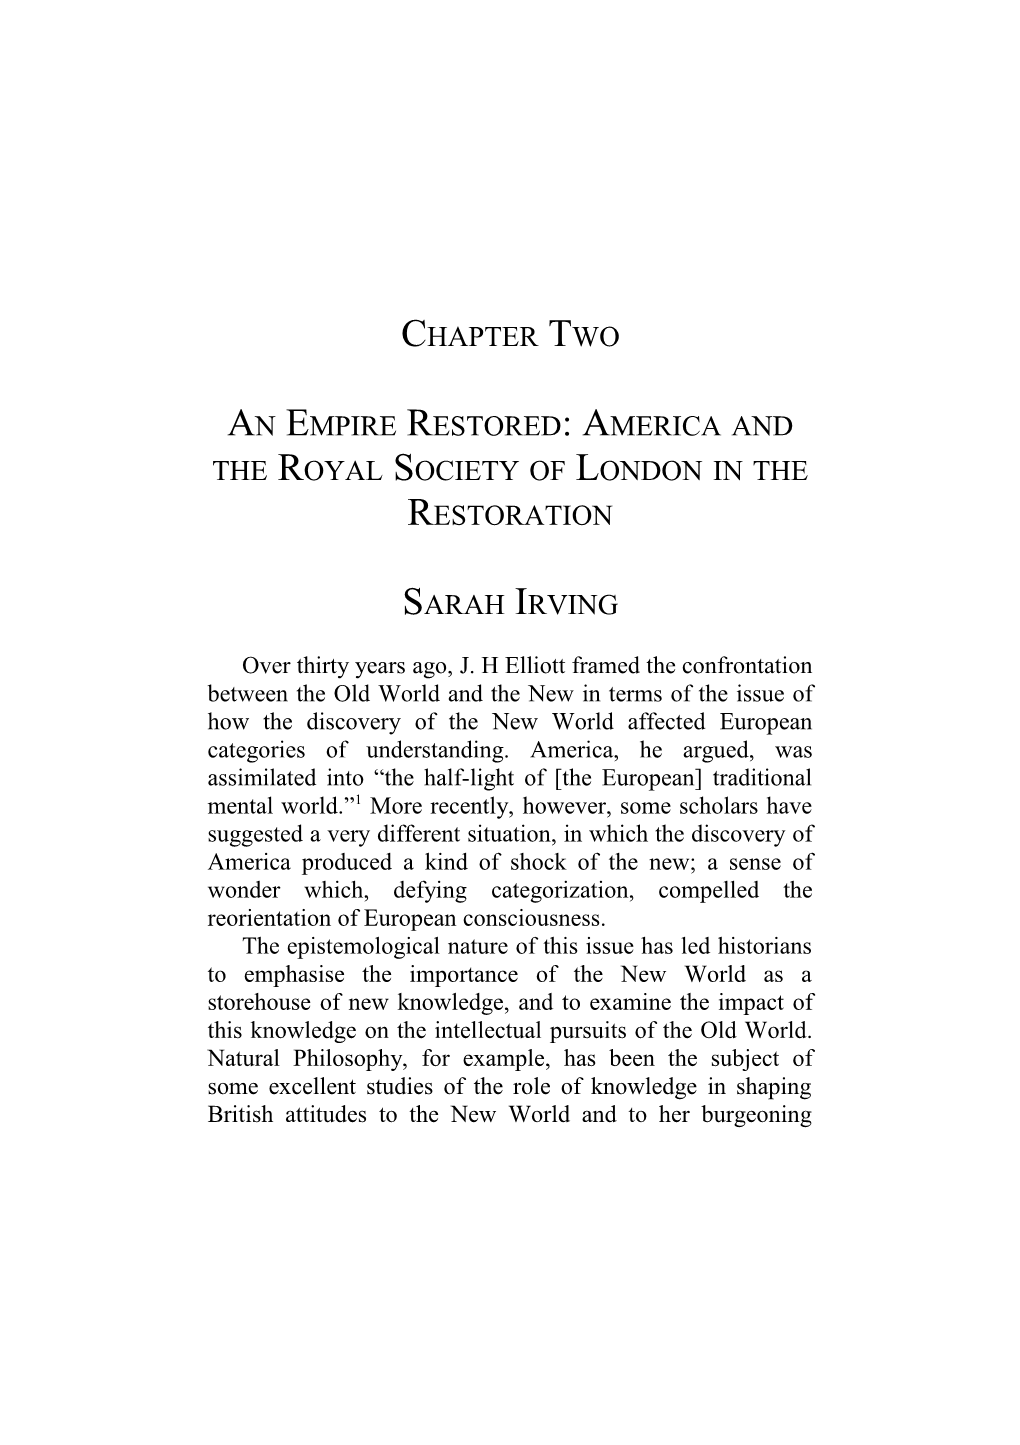 An Empire Restored: America and the Royal Society of London in the Restoration